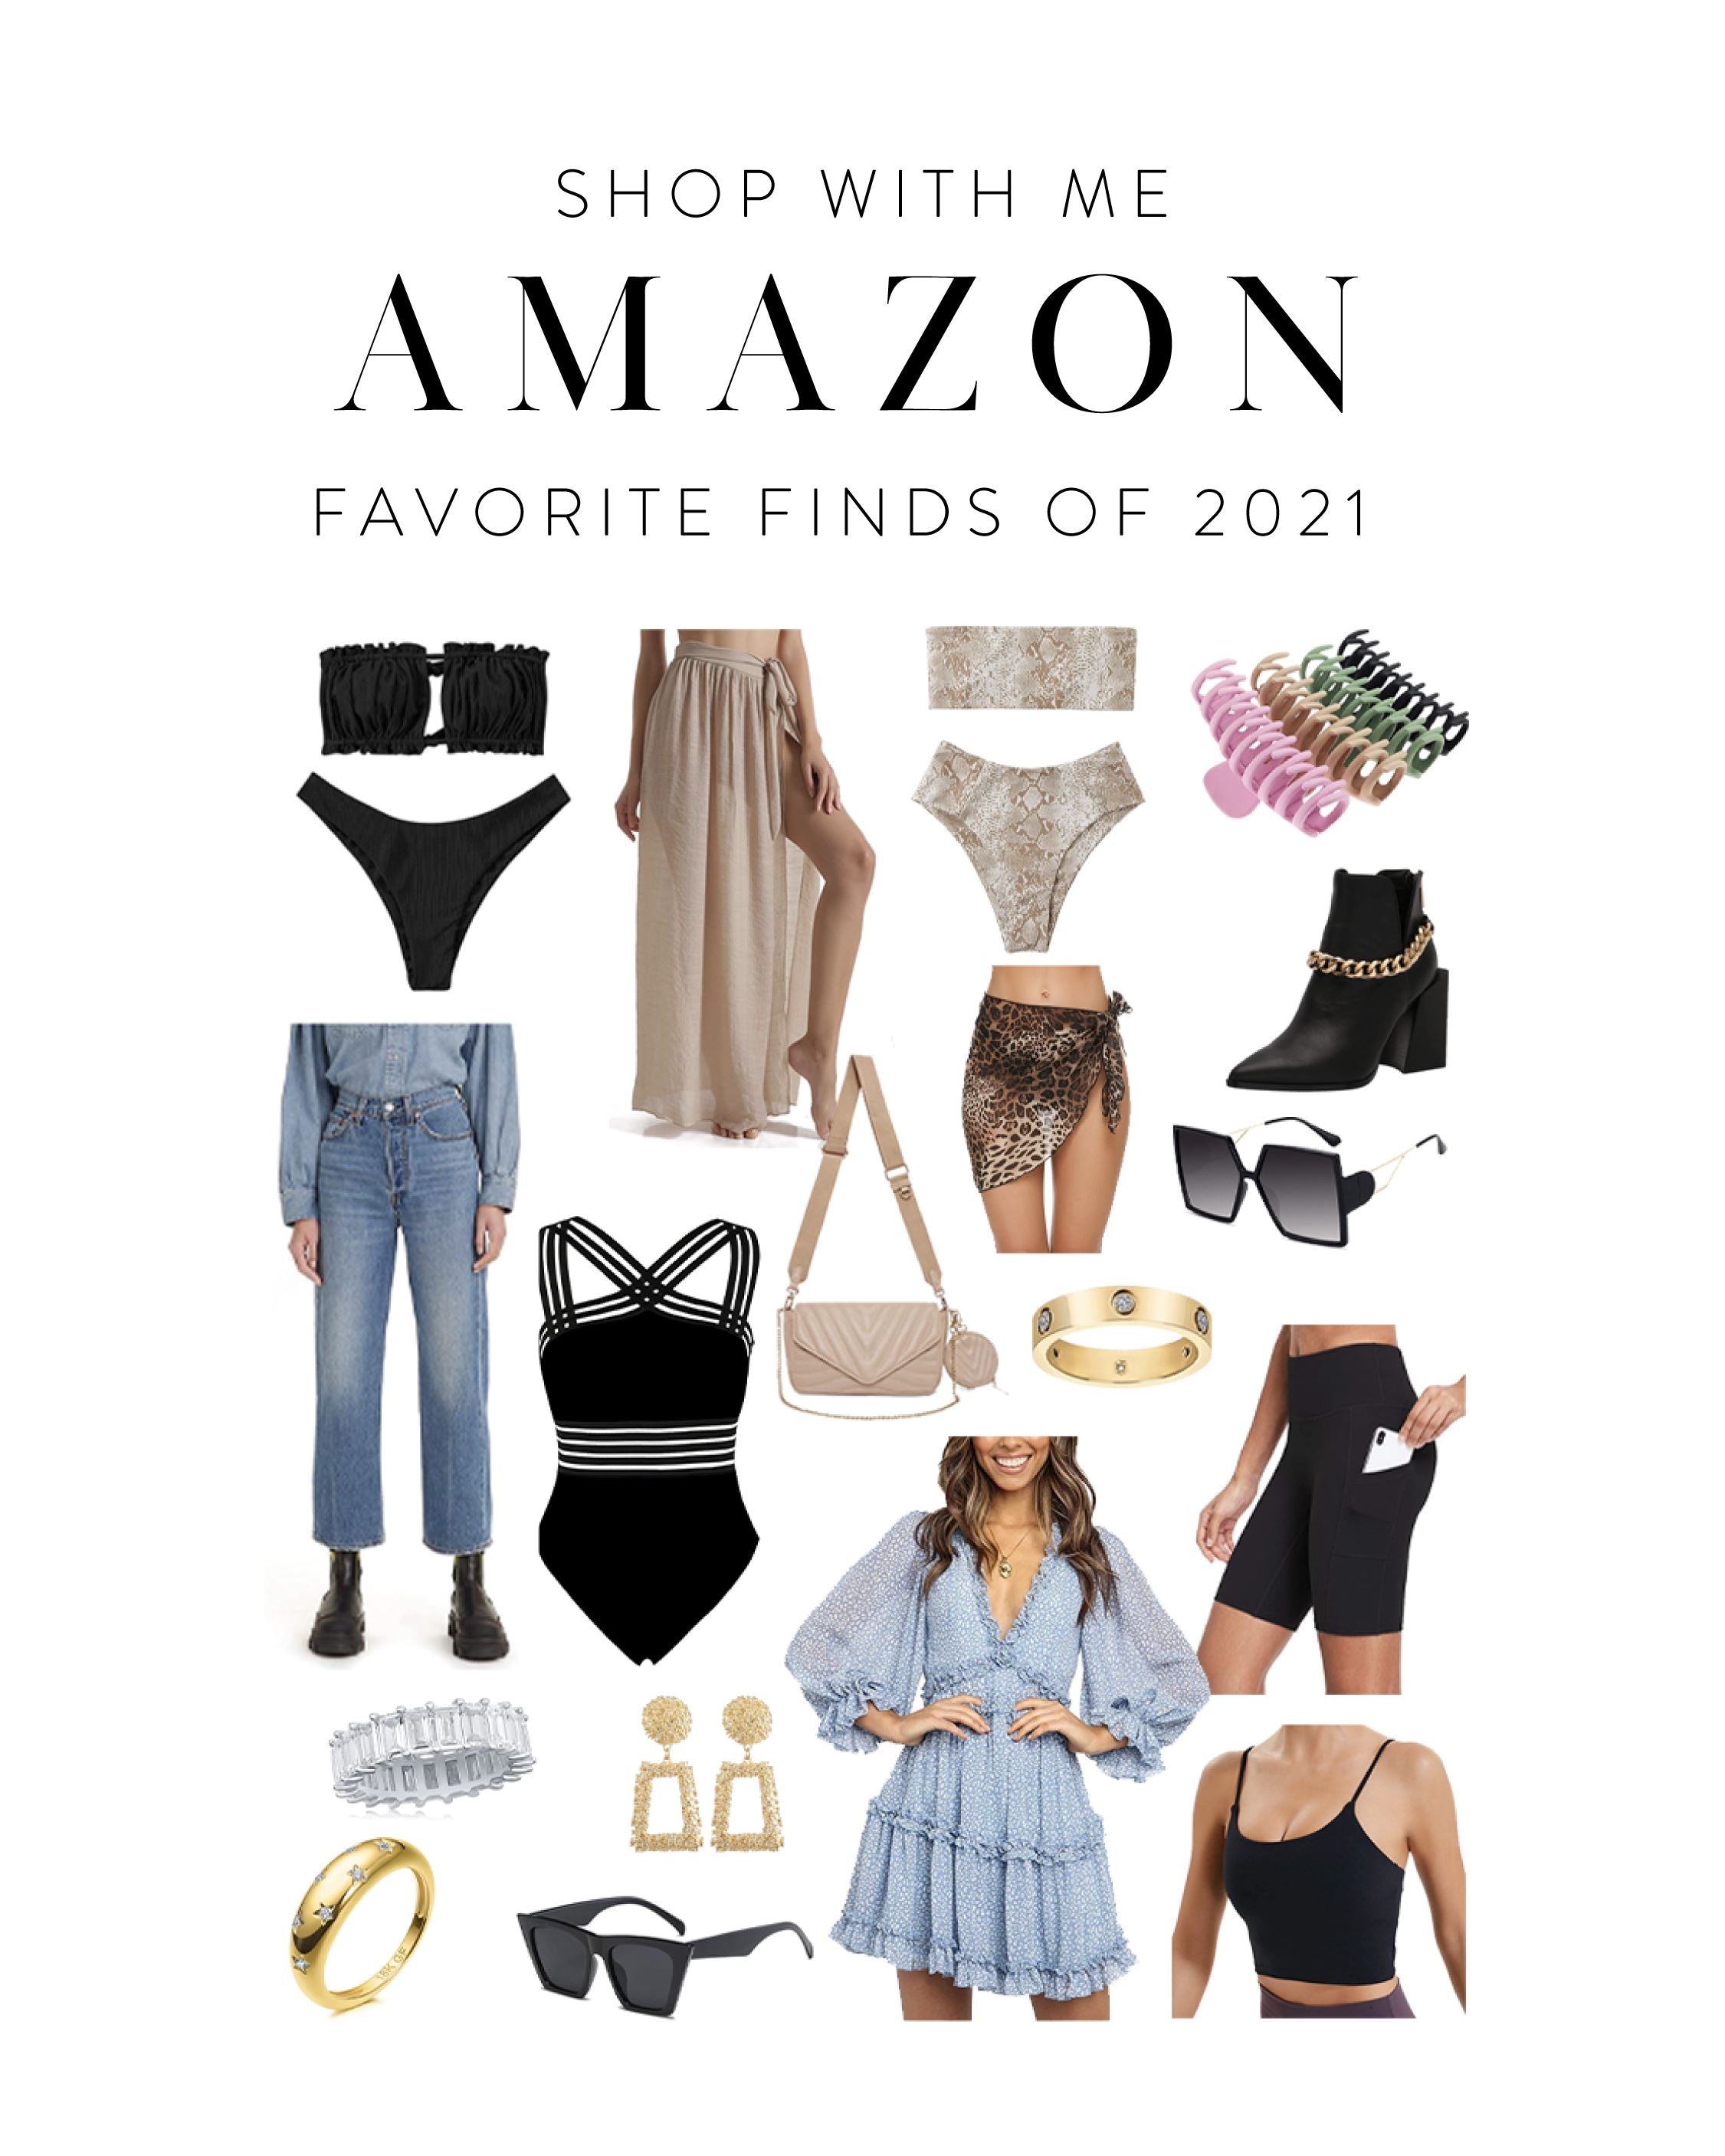 My Top 21 Amazon Products from 2021